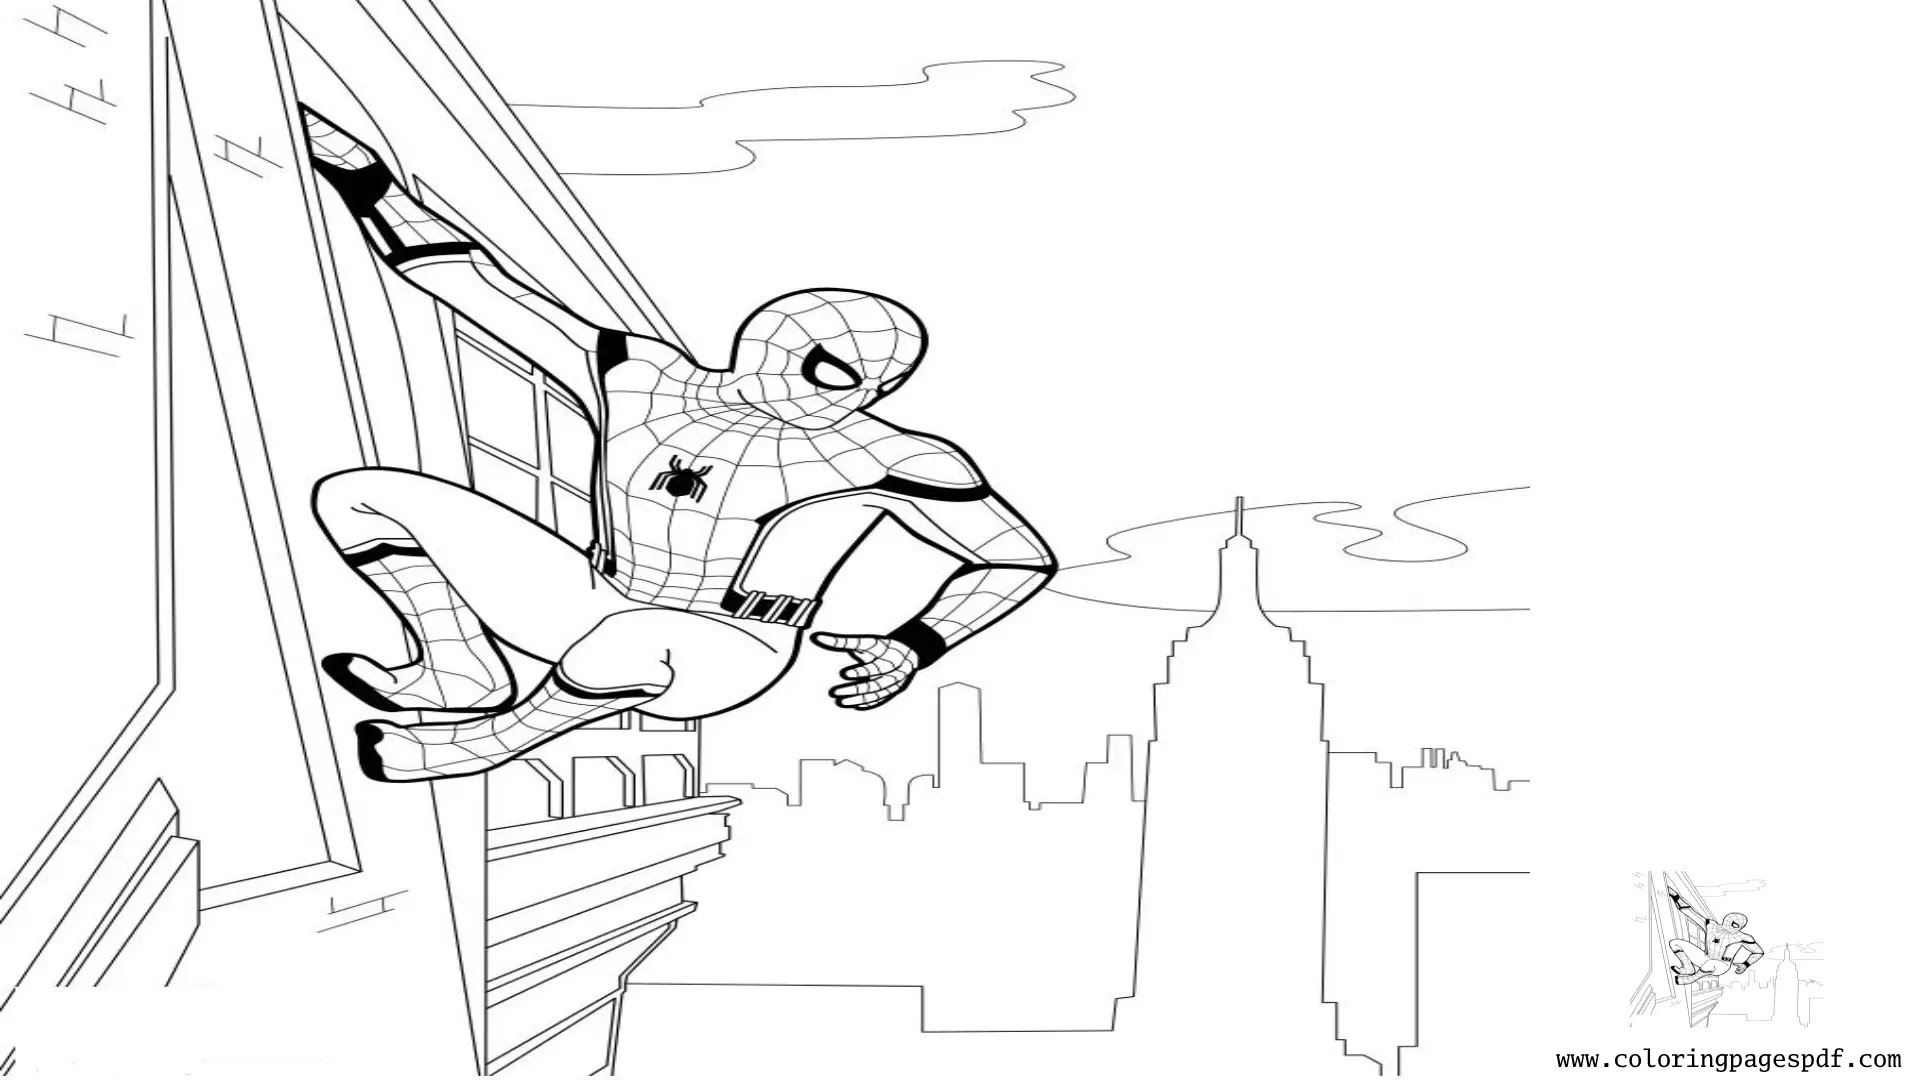 Coloring Page Of Spiderman On A High Building